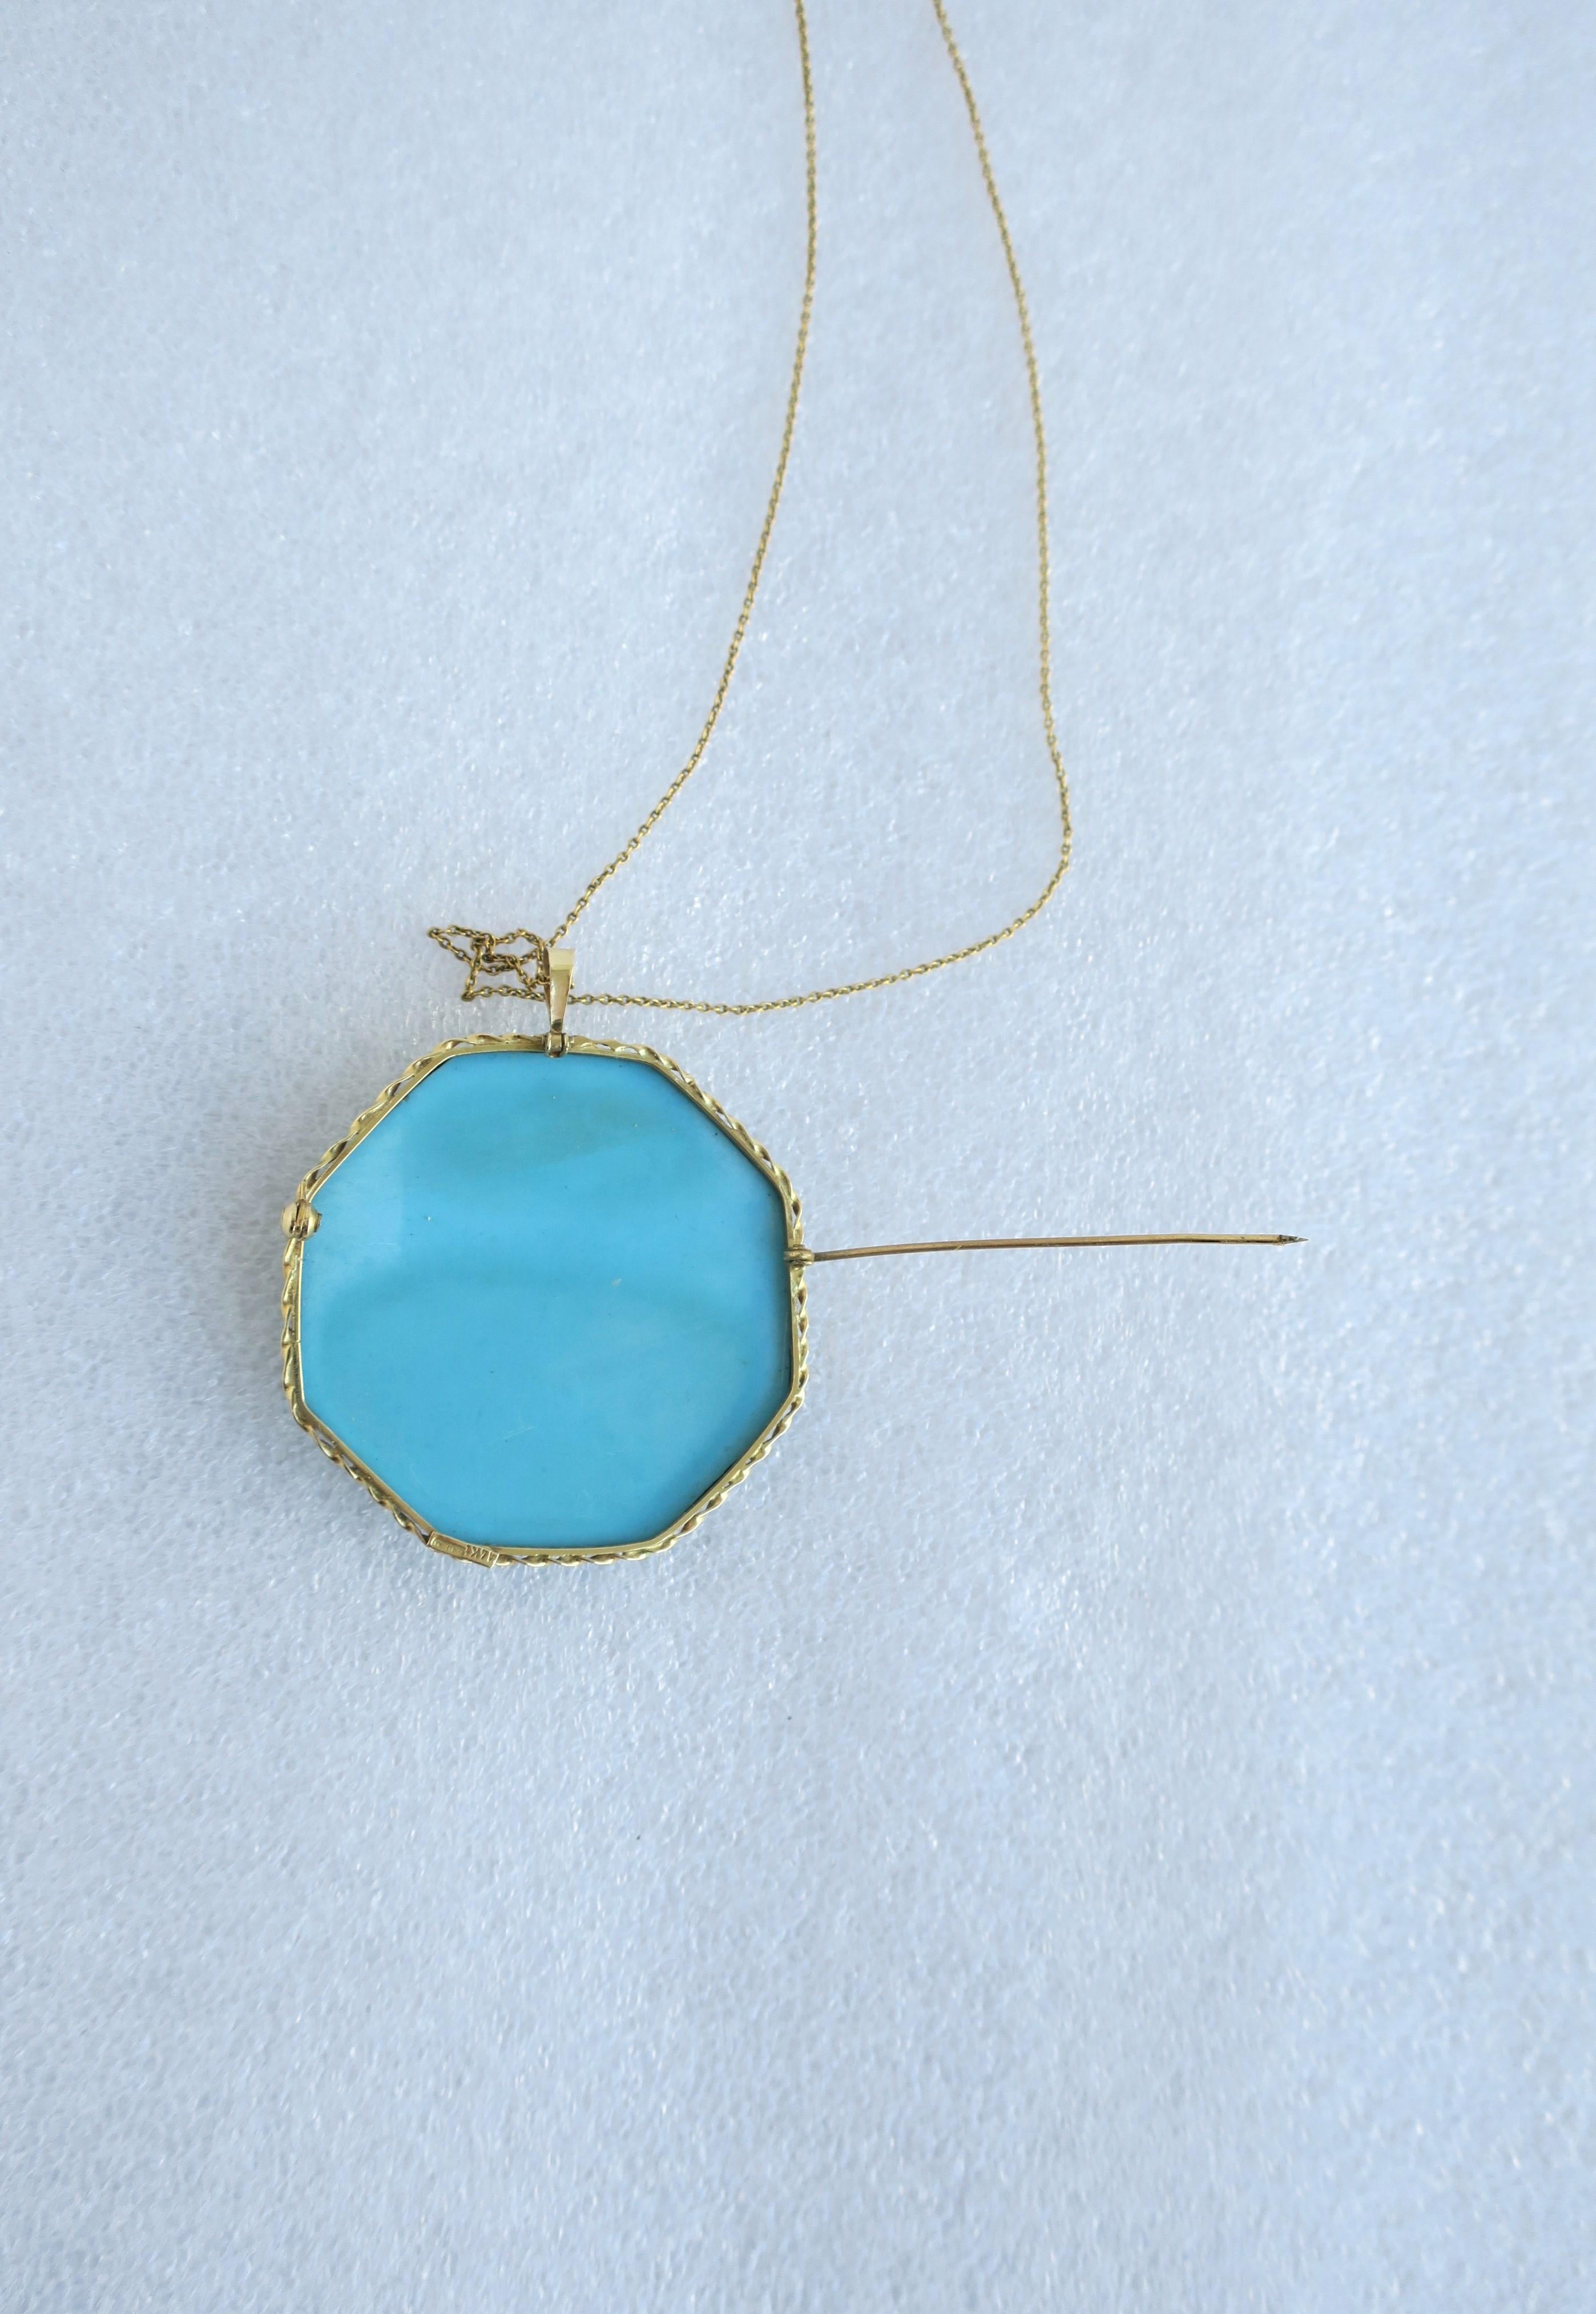 Italian Turquoise and 14-Karat Gold Pendant Necklace and Brooch Buccellati Style 12